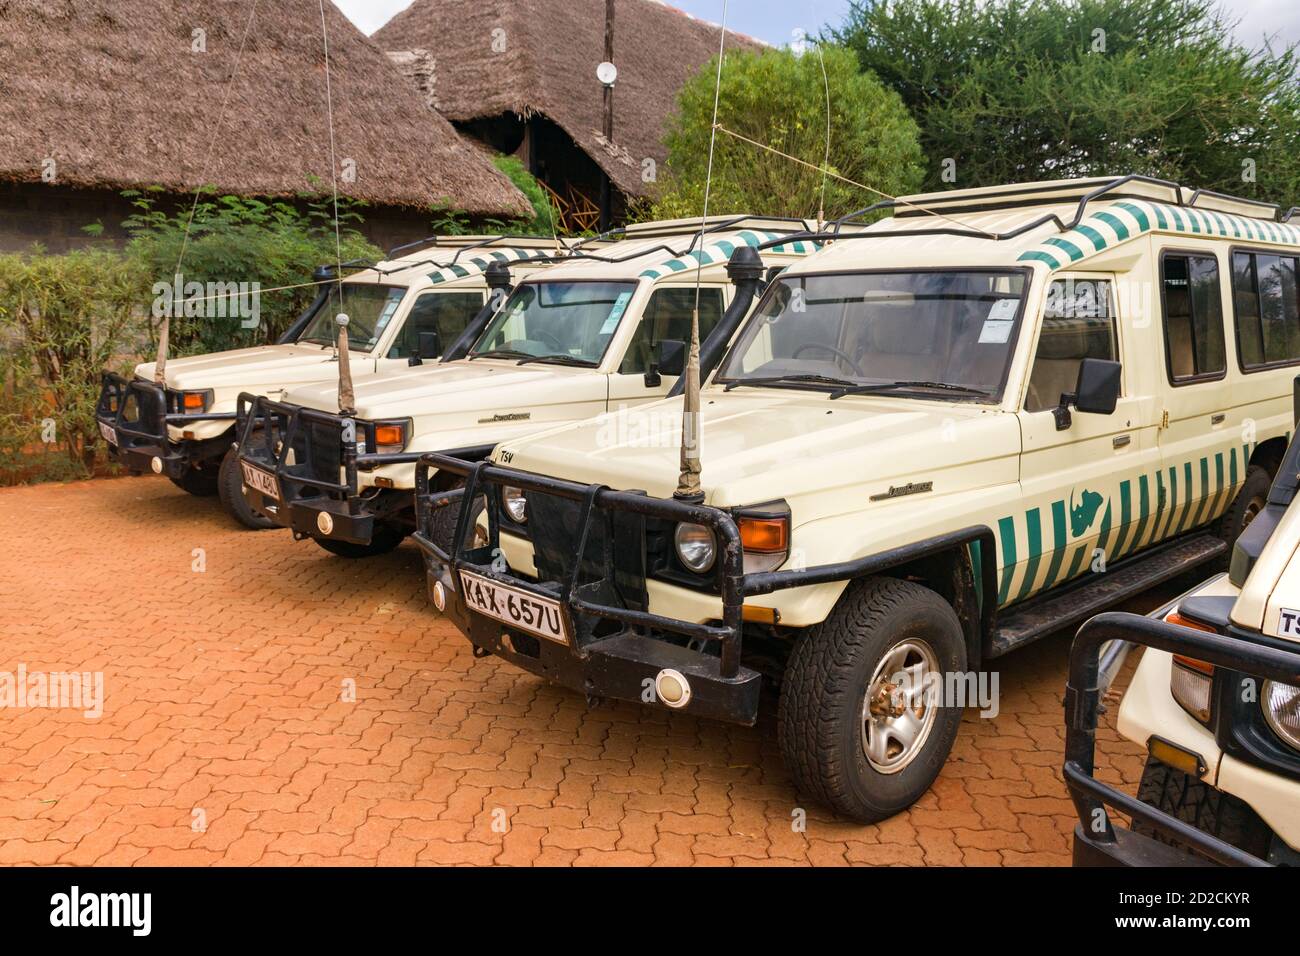 Several empty Toyota Landcruiser 4x4 offroad safari vehicles parked at a game lodge due to lack of tourists, Kenya, East Africa Stock Photo